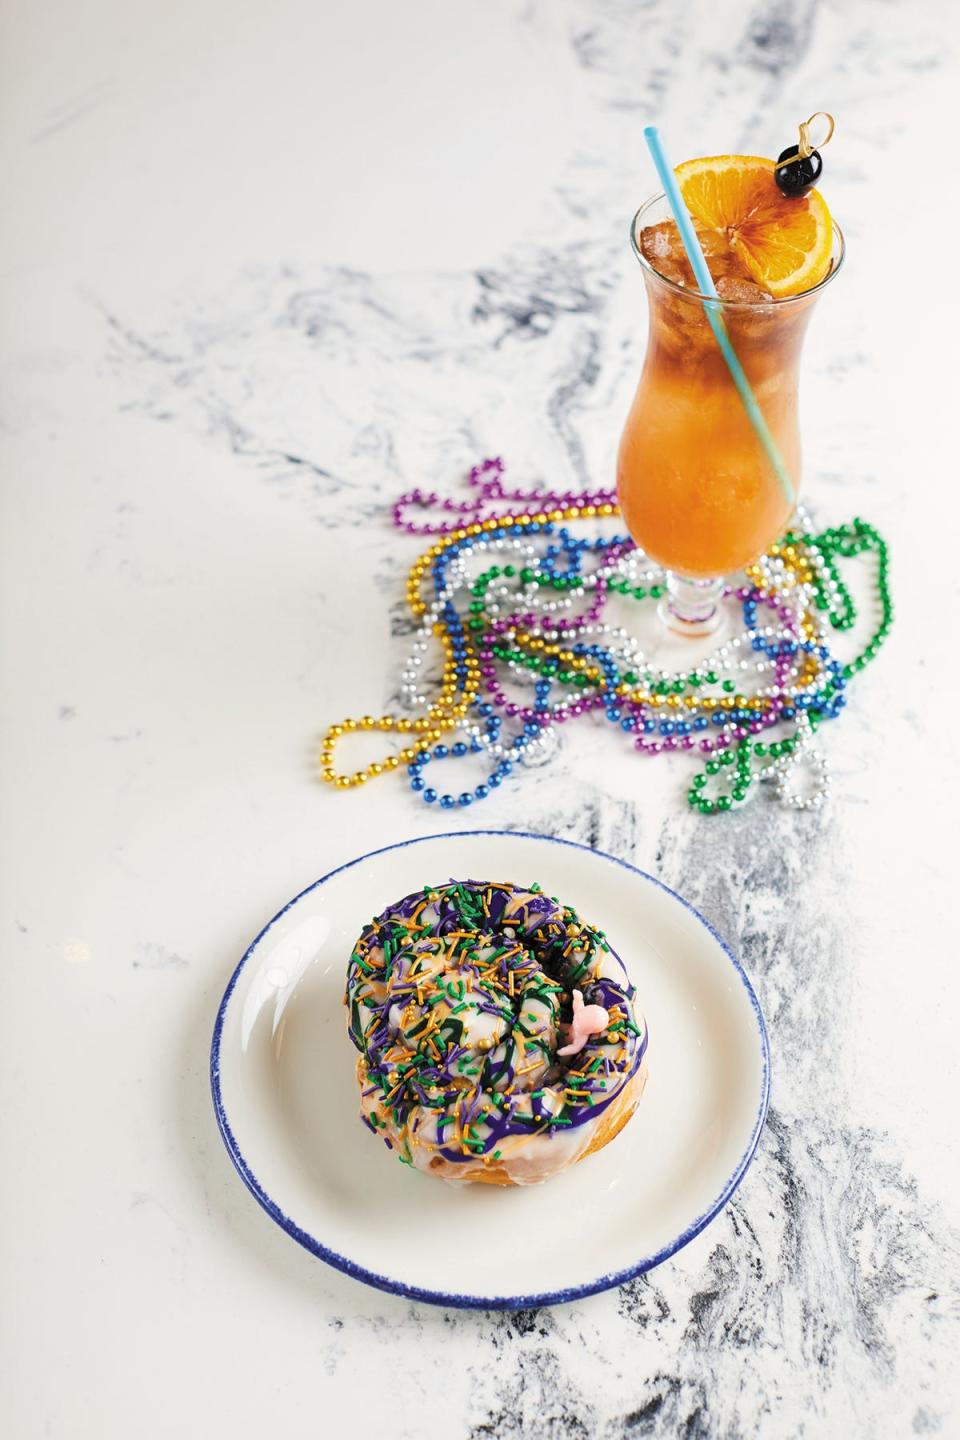 Mardi Gras treats: mini king cakes and Hurricane cocktails are among the Fat Tuesday-themed offerings at Lucky Shuck in Jupiter.